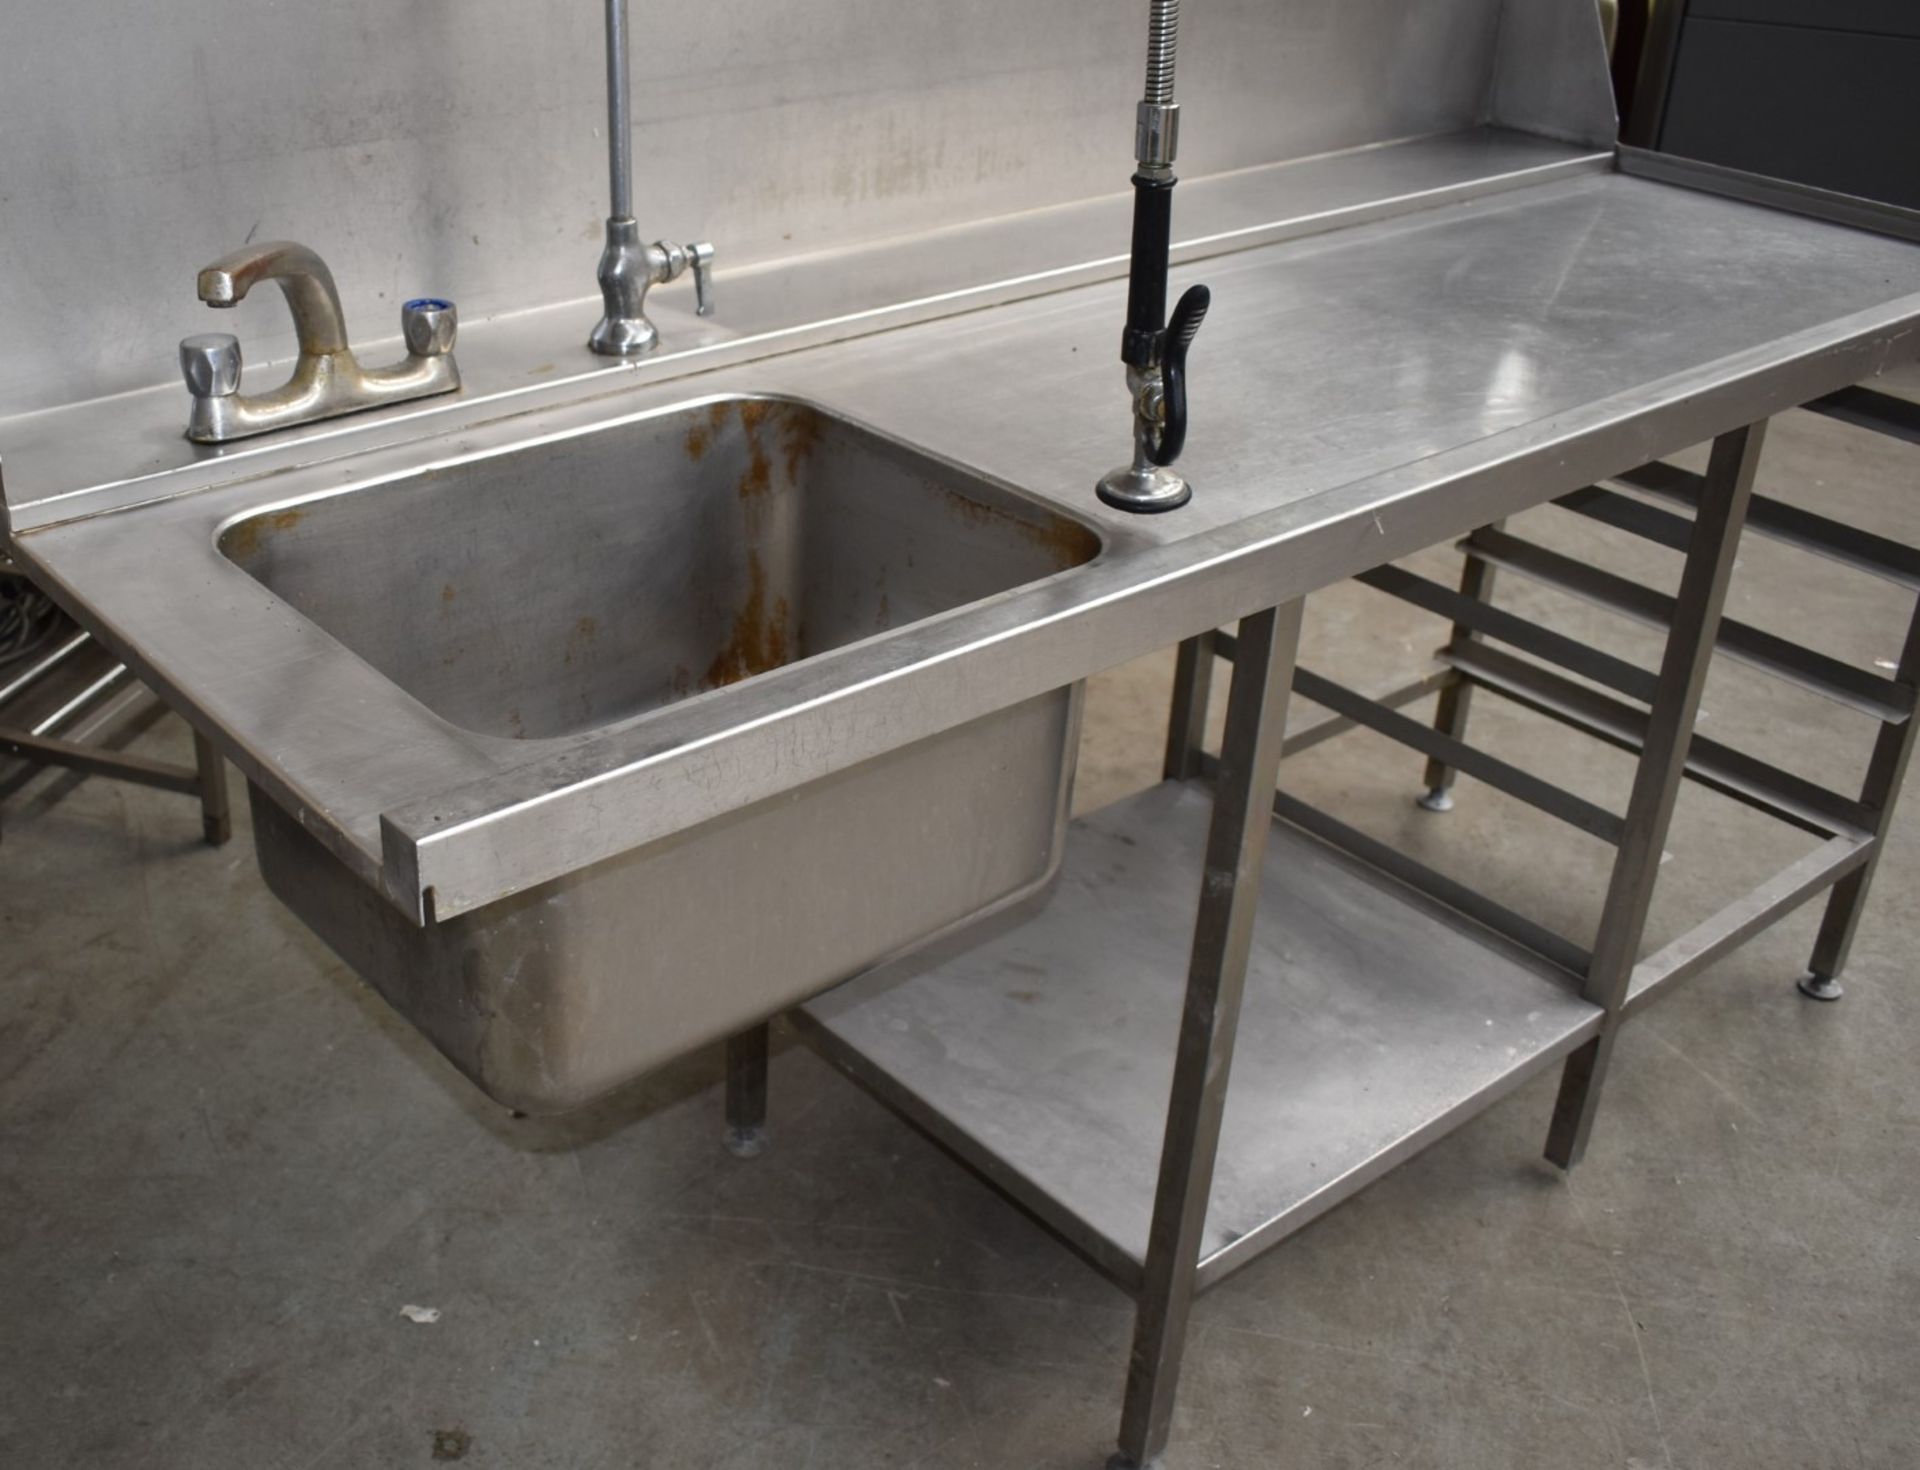 1 x Stainless Steel Passthrough Dishwasher Inlet Table Featuring Wash Basin, Mixer Tap, Hose Spray - Image 6 of 6